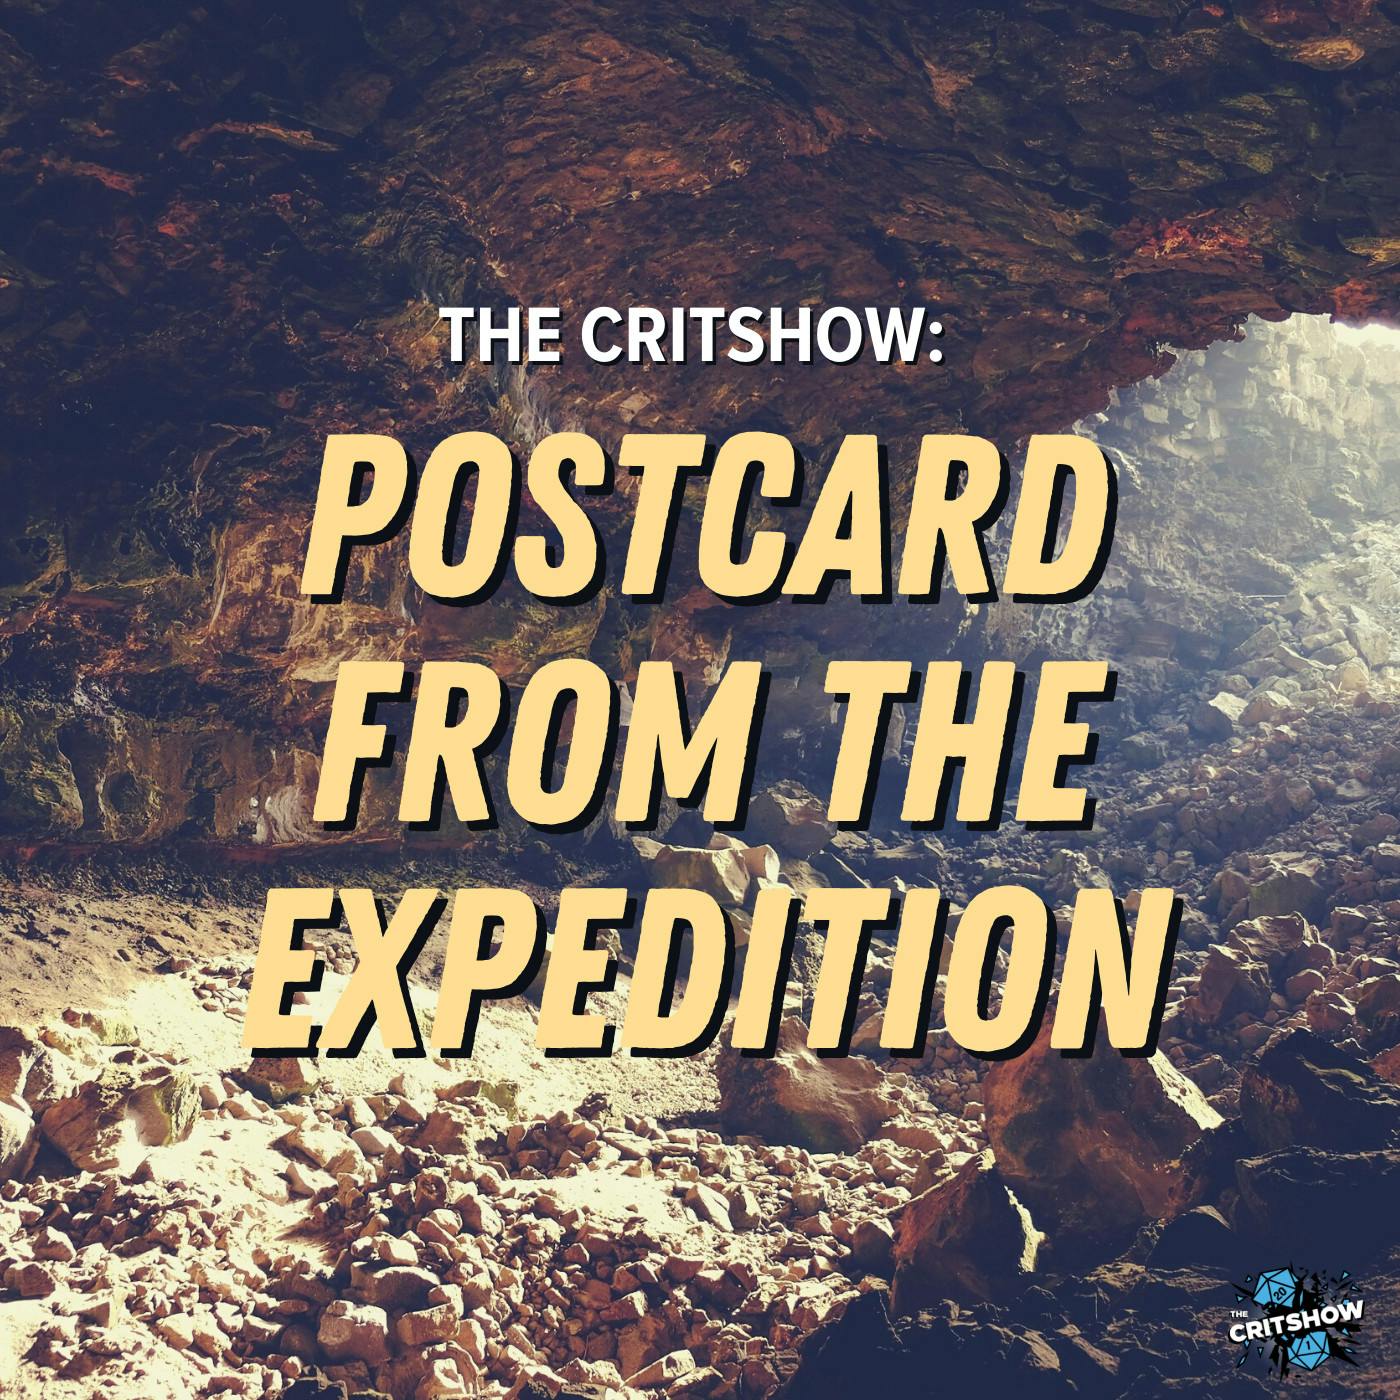 The Critshow: Postcard from the Expedition